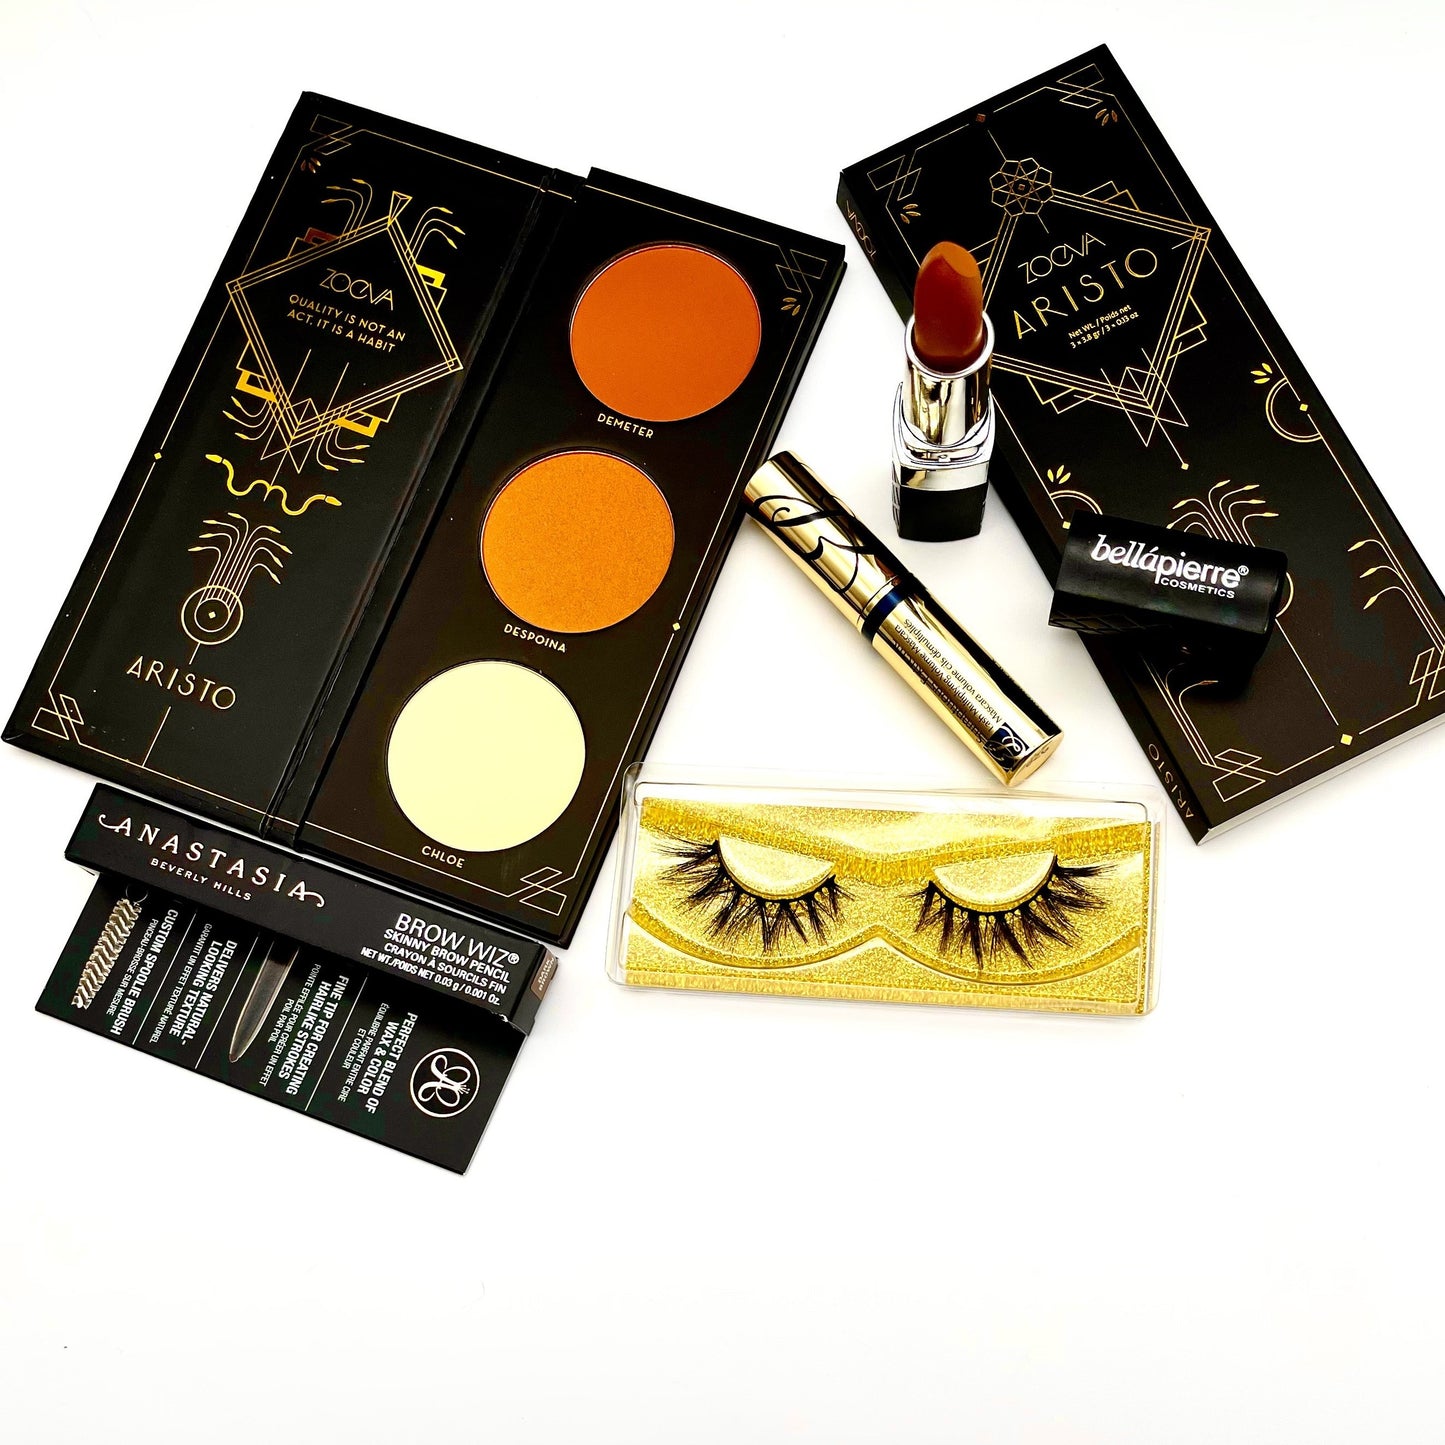 zoeva 5 piece makeup bundle, excellent for gifts & makeup professionals alike. This bundle comes with one estee lauder sumptuous extreme mascara, one Anastasia brow wiz skinny brow pencil, one bellapierre mineral infused matte lipstick in The Color Incognito, 22mm in length 100% vegan wispy all natural eyelash set that can be worn with or without makeup up to 18 times with proper care & Free gifts